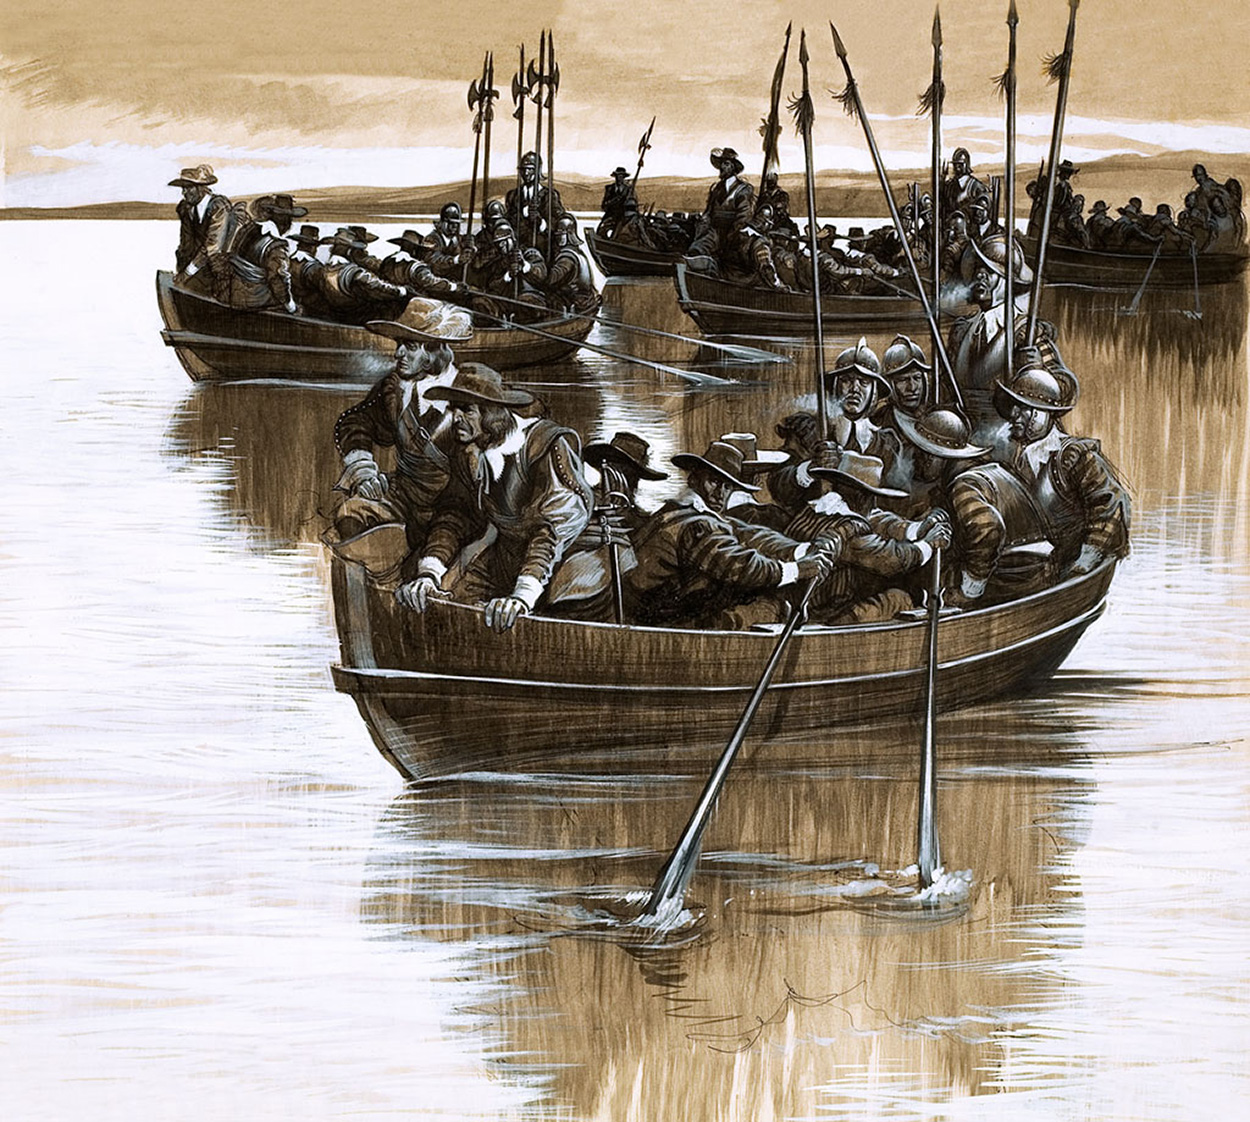 Cromwell Crosses The River Severn (Original) art by British History (Ron Embleton) at The Illustration Art Gallery